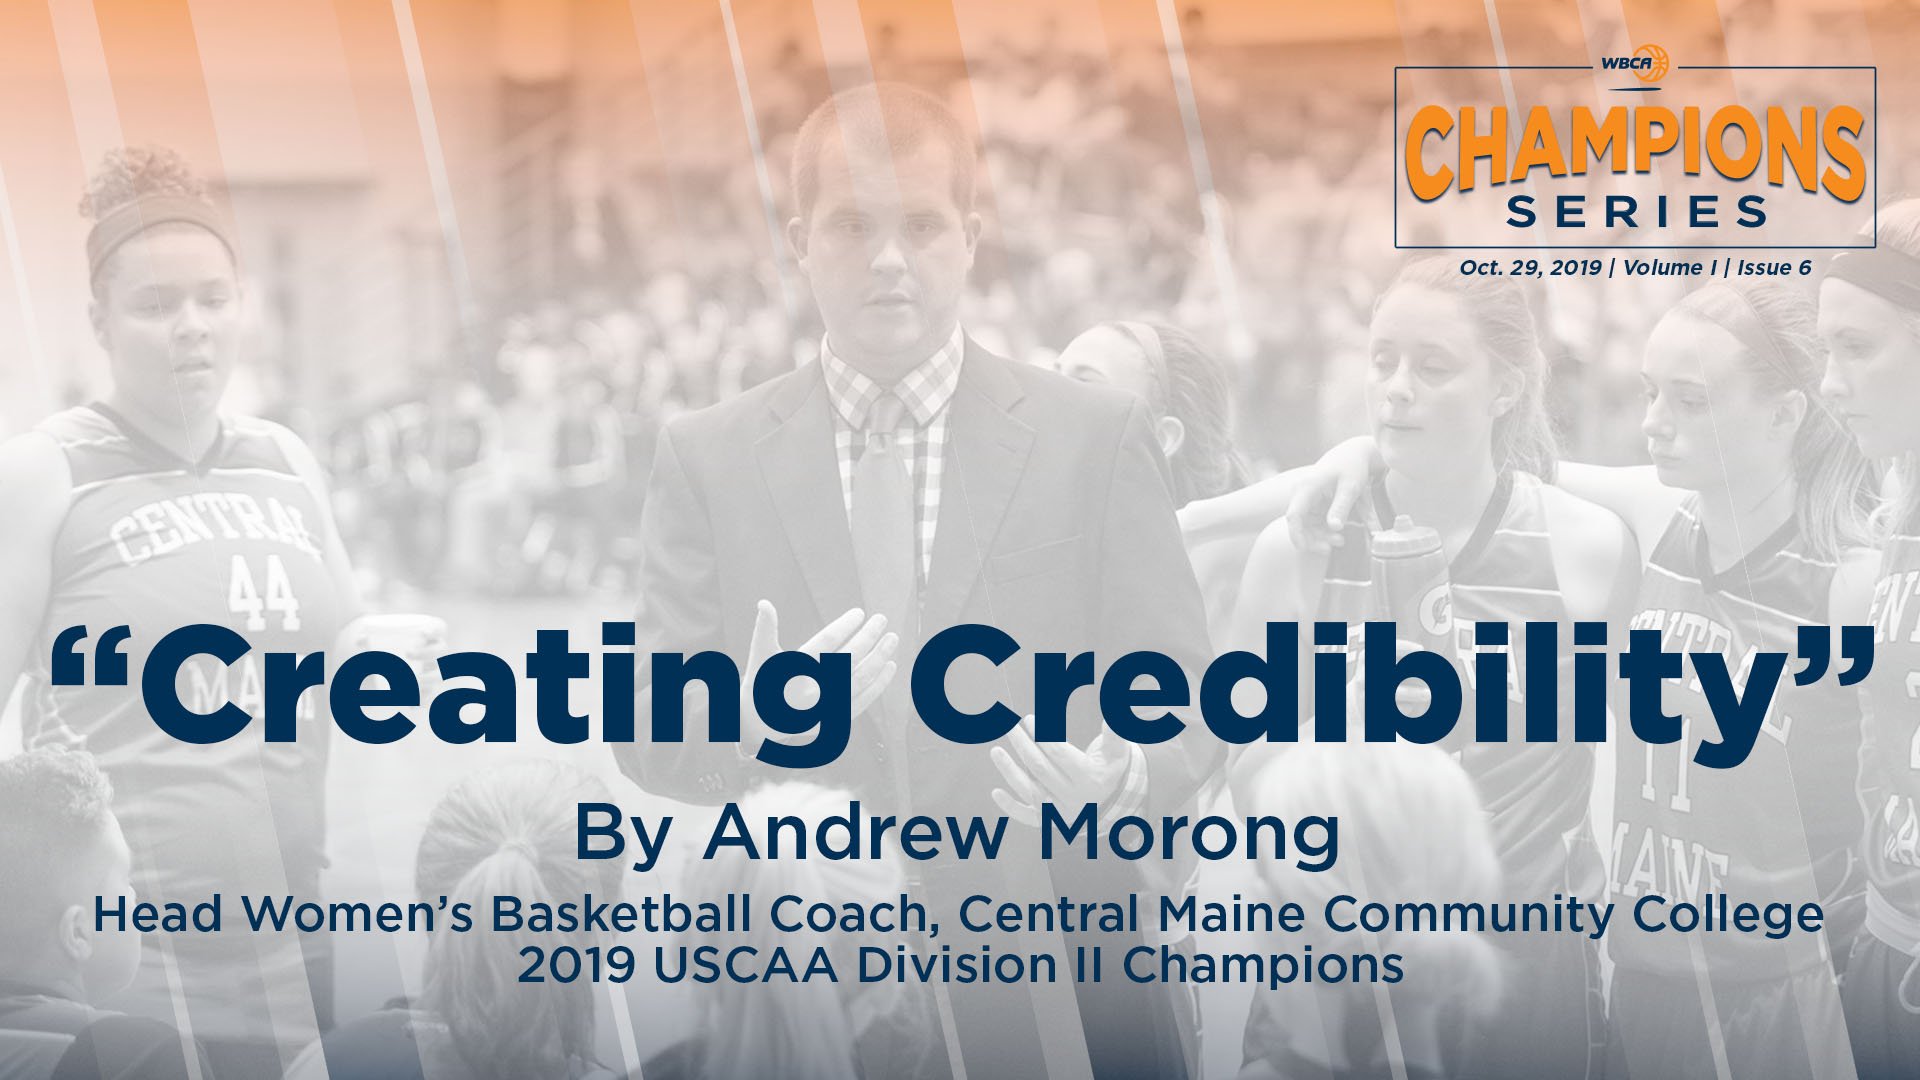 Coach Morong published in WBCA Championship Series blog